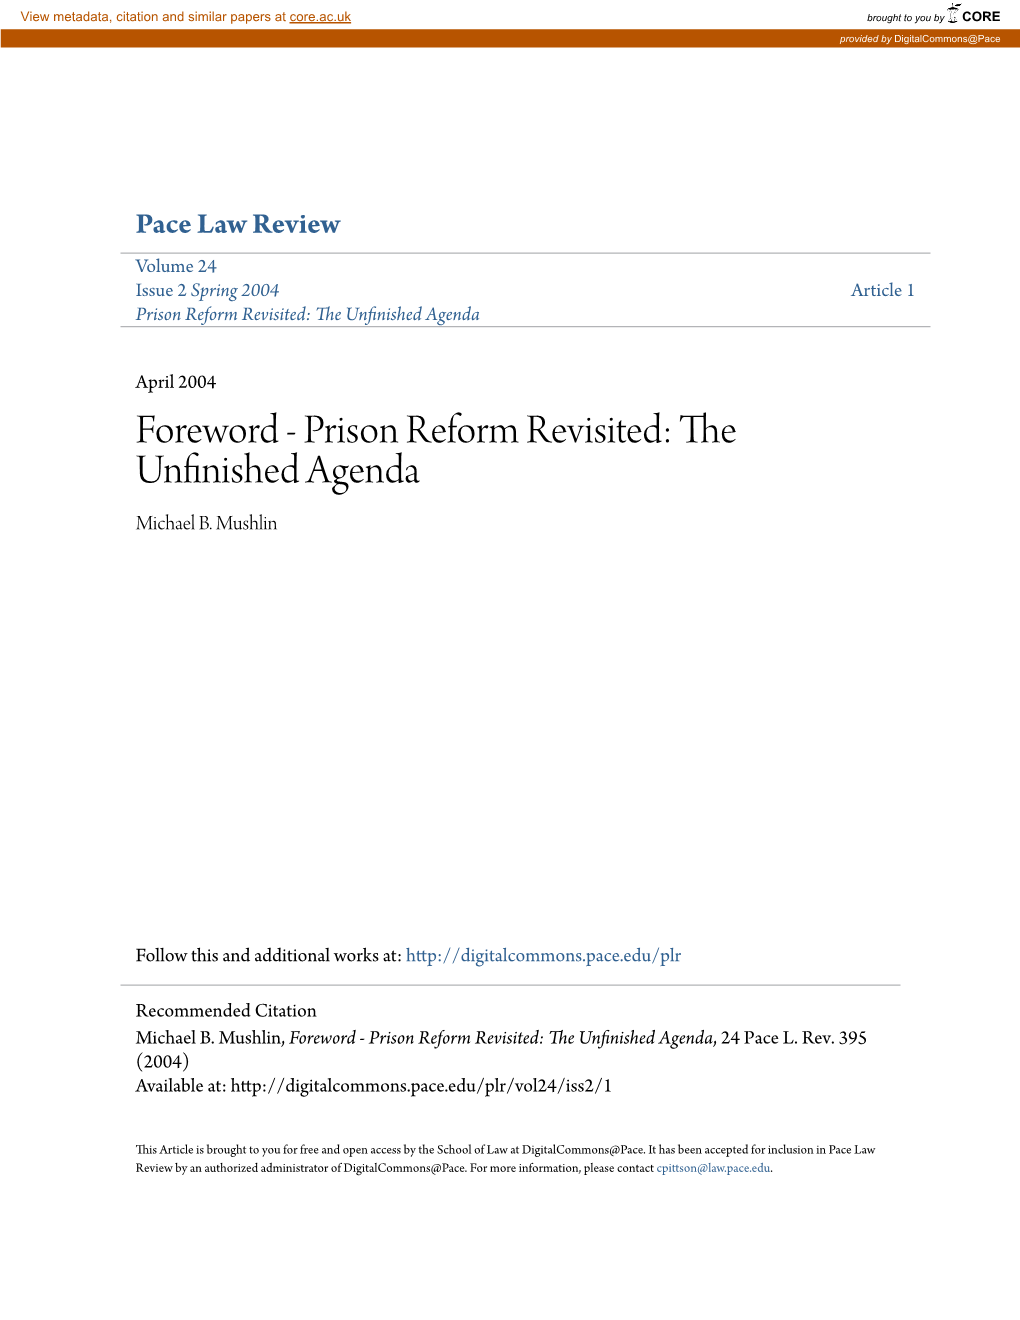 Foreword - Prison Reform Revisited: the Unfinished Agenda Michael B